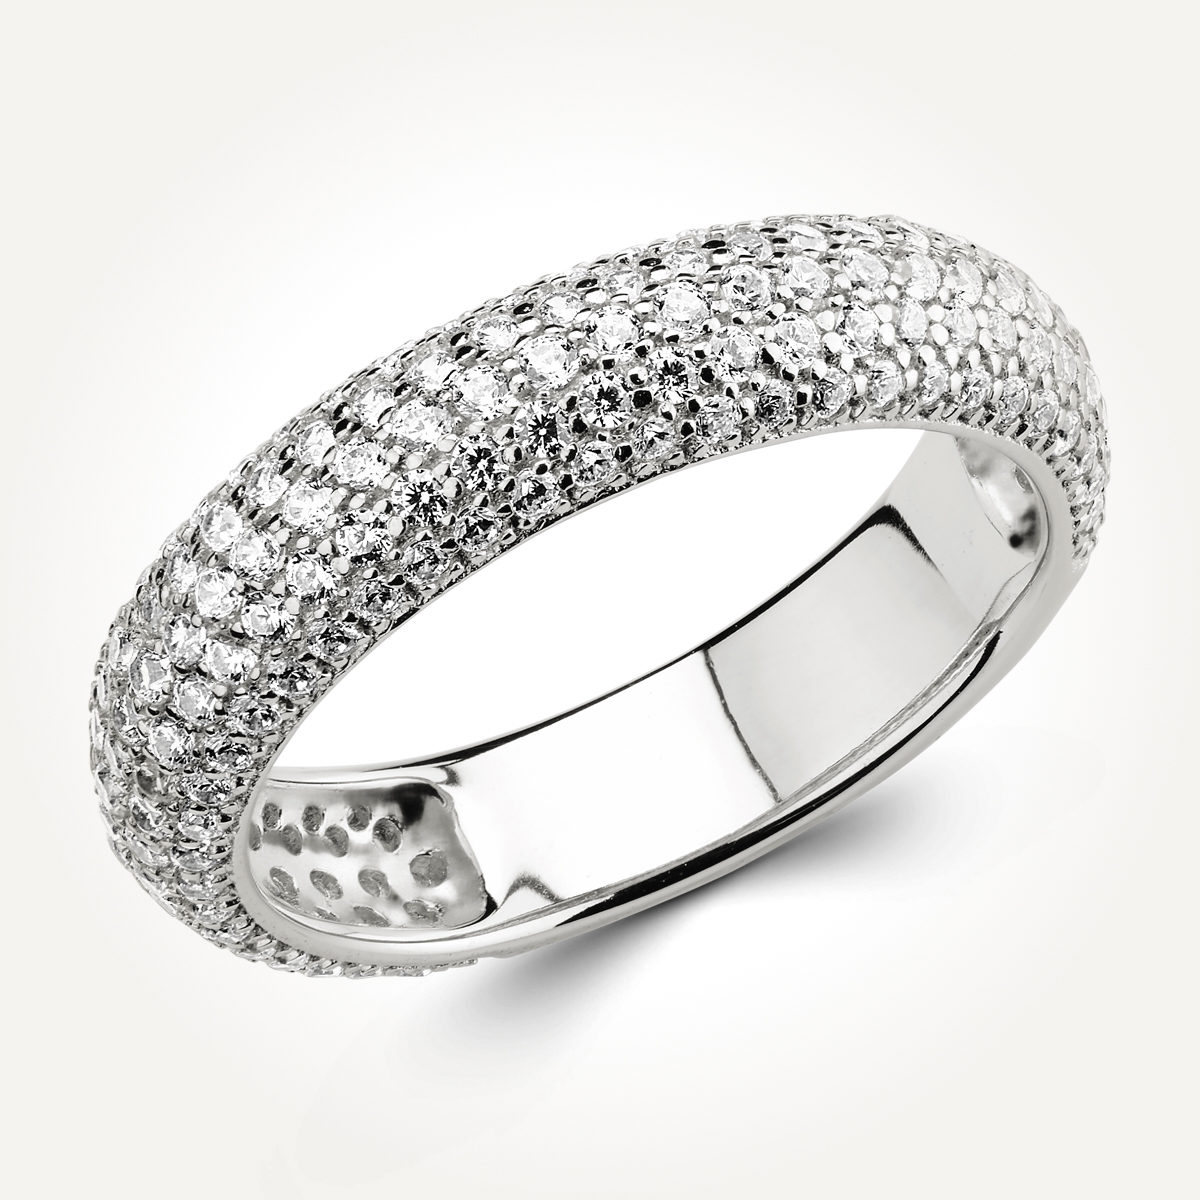 14KT White Gold Multi Stone Pave Ring